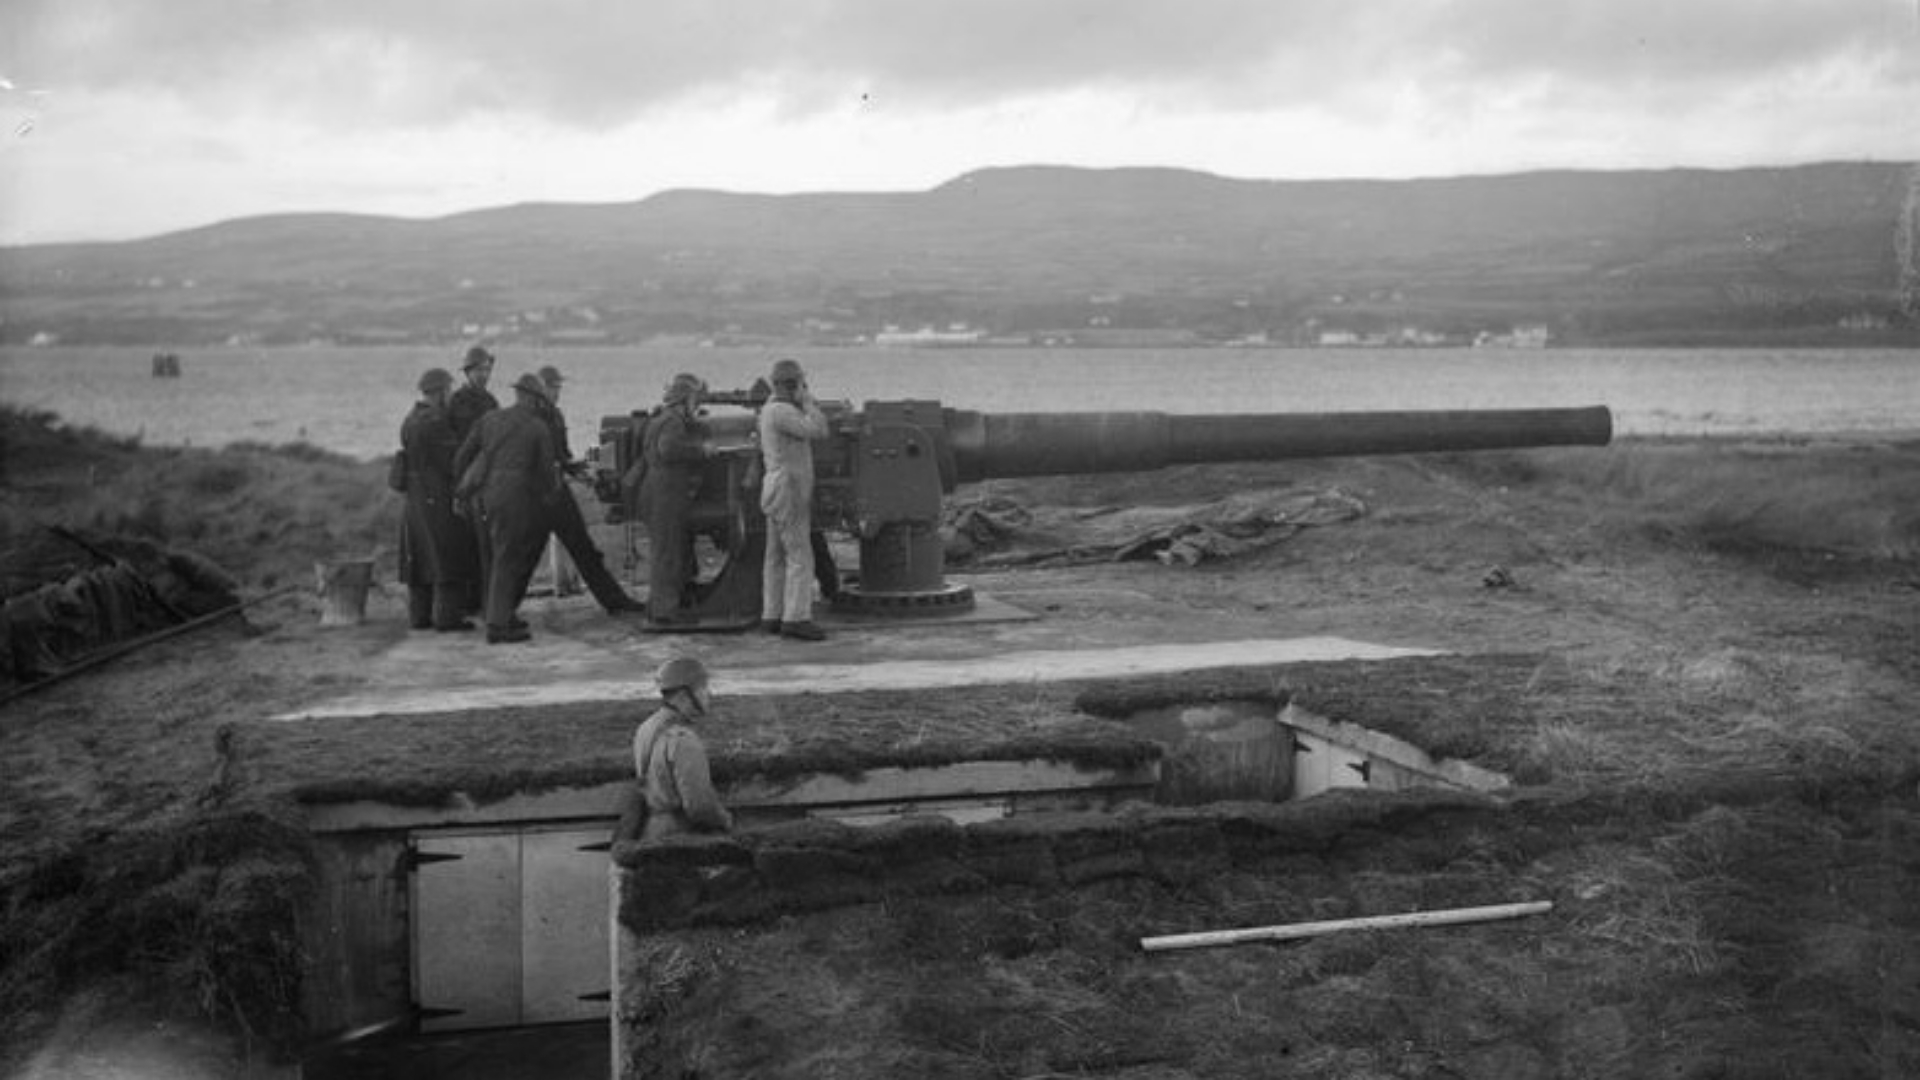 A 6-inch naval coastal defence gun at defences under control of 380th Battery, Royal Artillery (T.A.) at Magilligan Point, Co. Londonderry. The photo is part of a series from the visit of 'Sortie Y' to Northern Command.